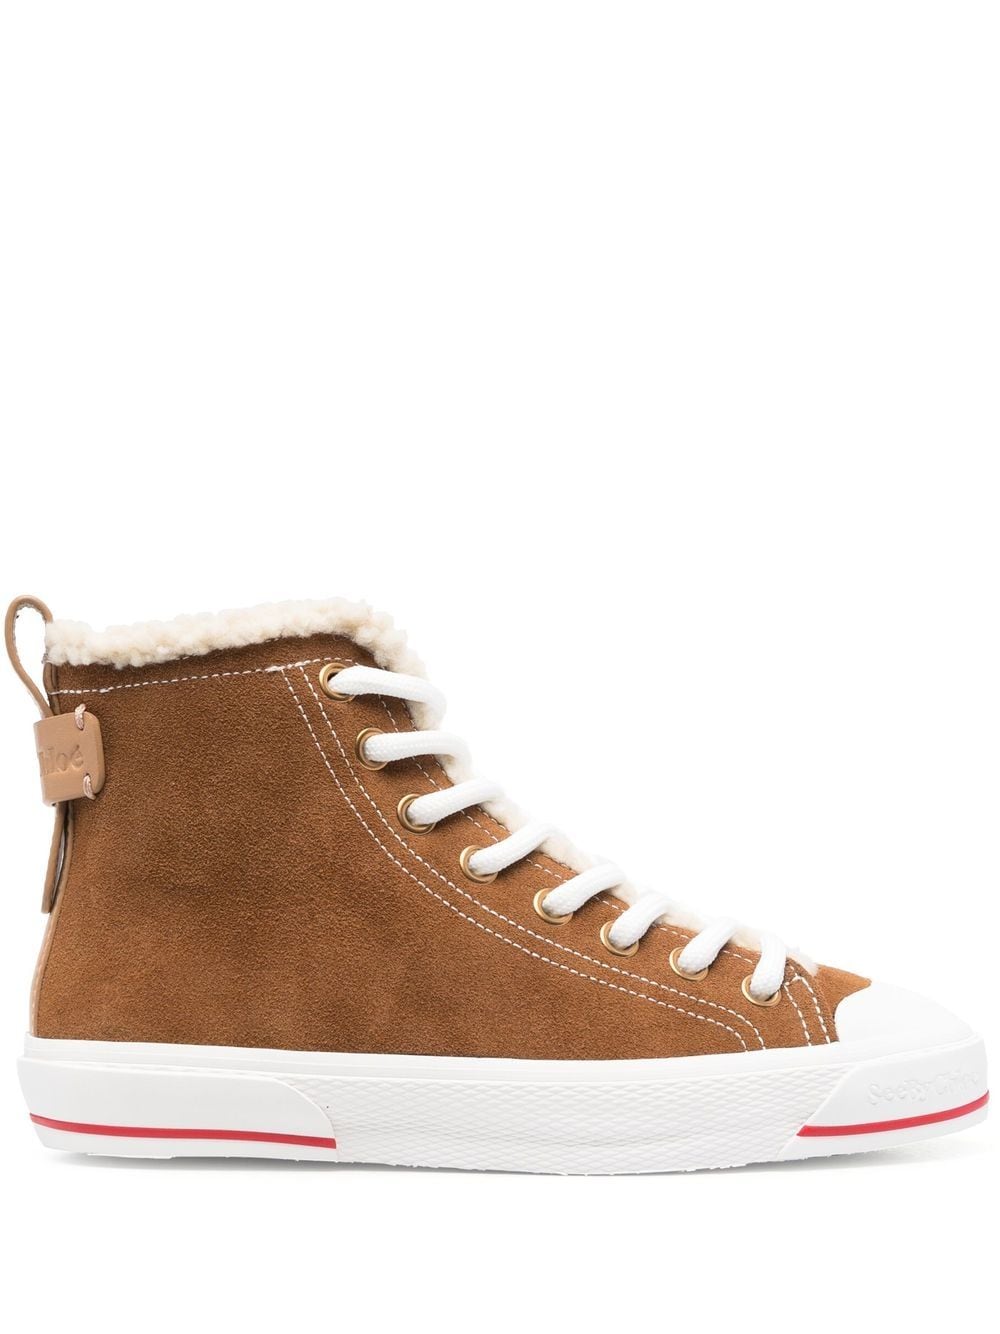 See by Chloé high-top shearling lined sneakers - Brown von See by Chloé